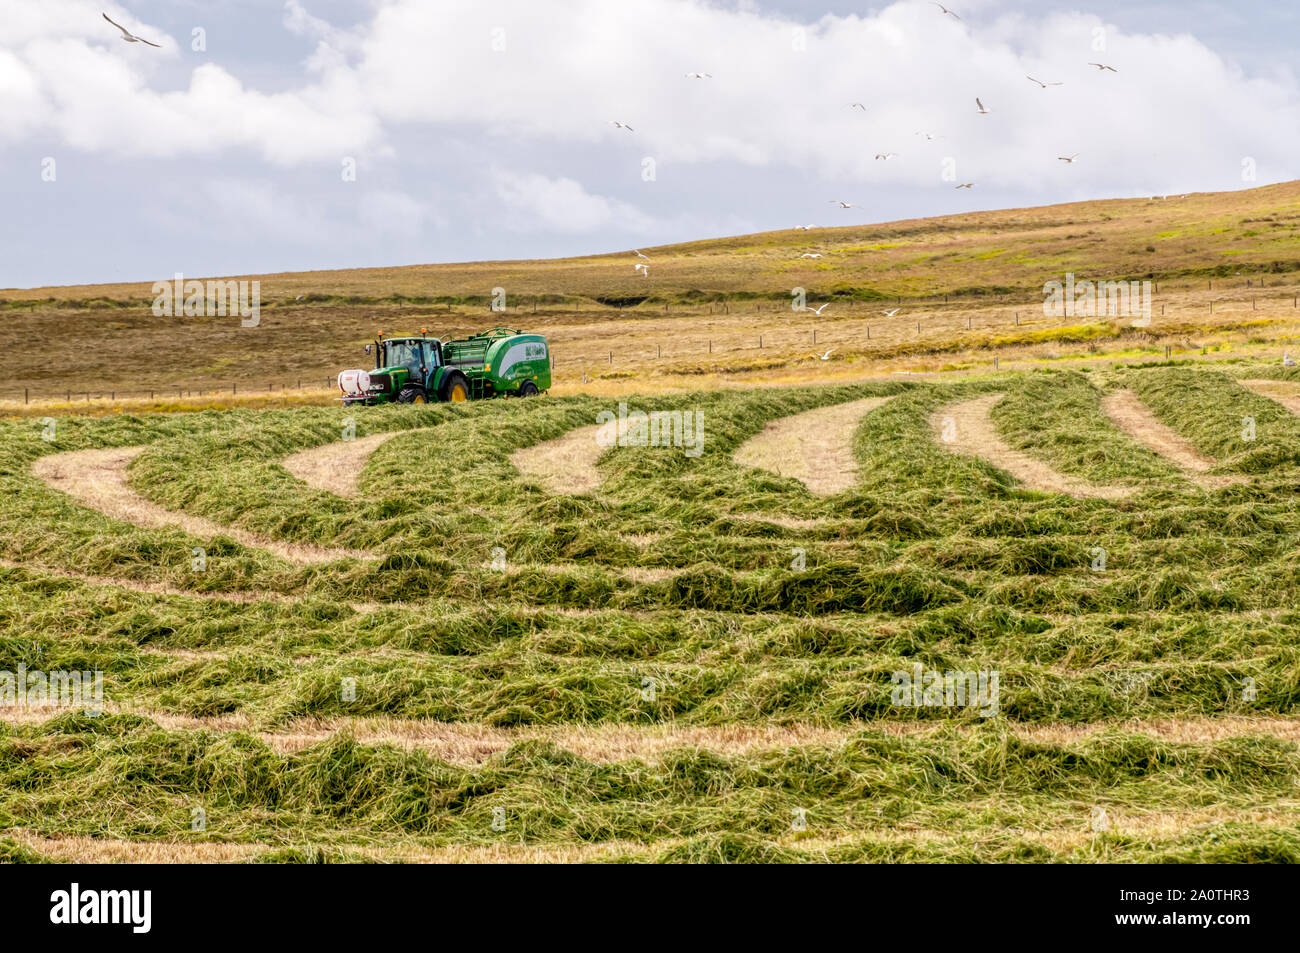 John Deere tractor towing McHale Fusion 3 integrated baler wrapper making sileage in Shetland. Ecosyl silage additive drum mounted on front of tractor Stock Photo